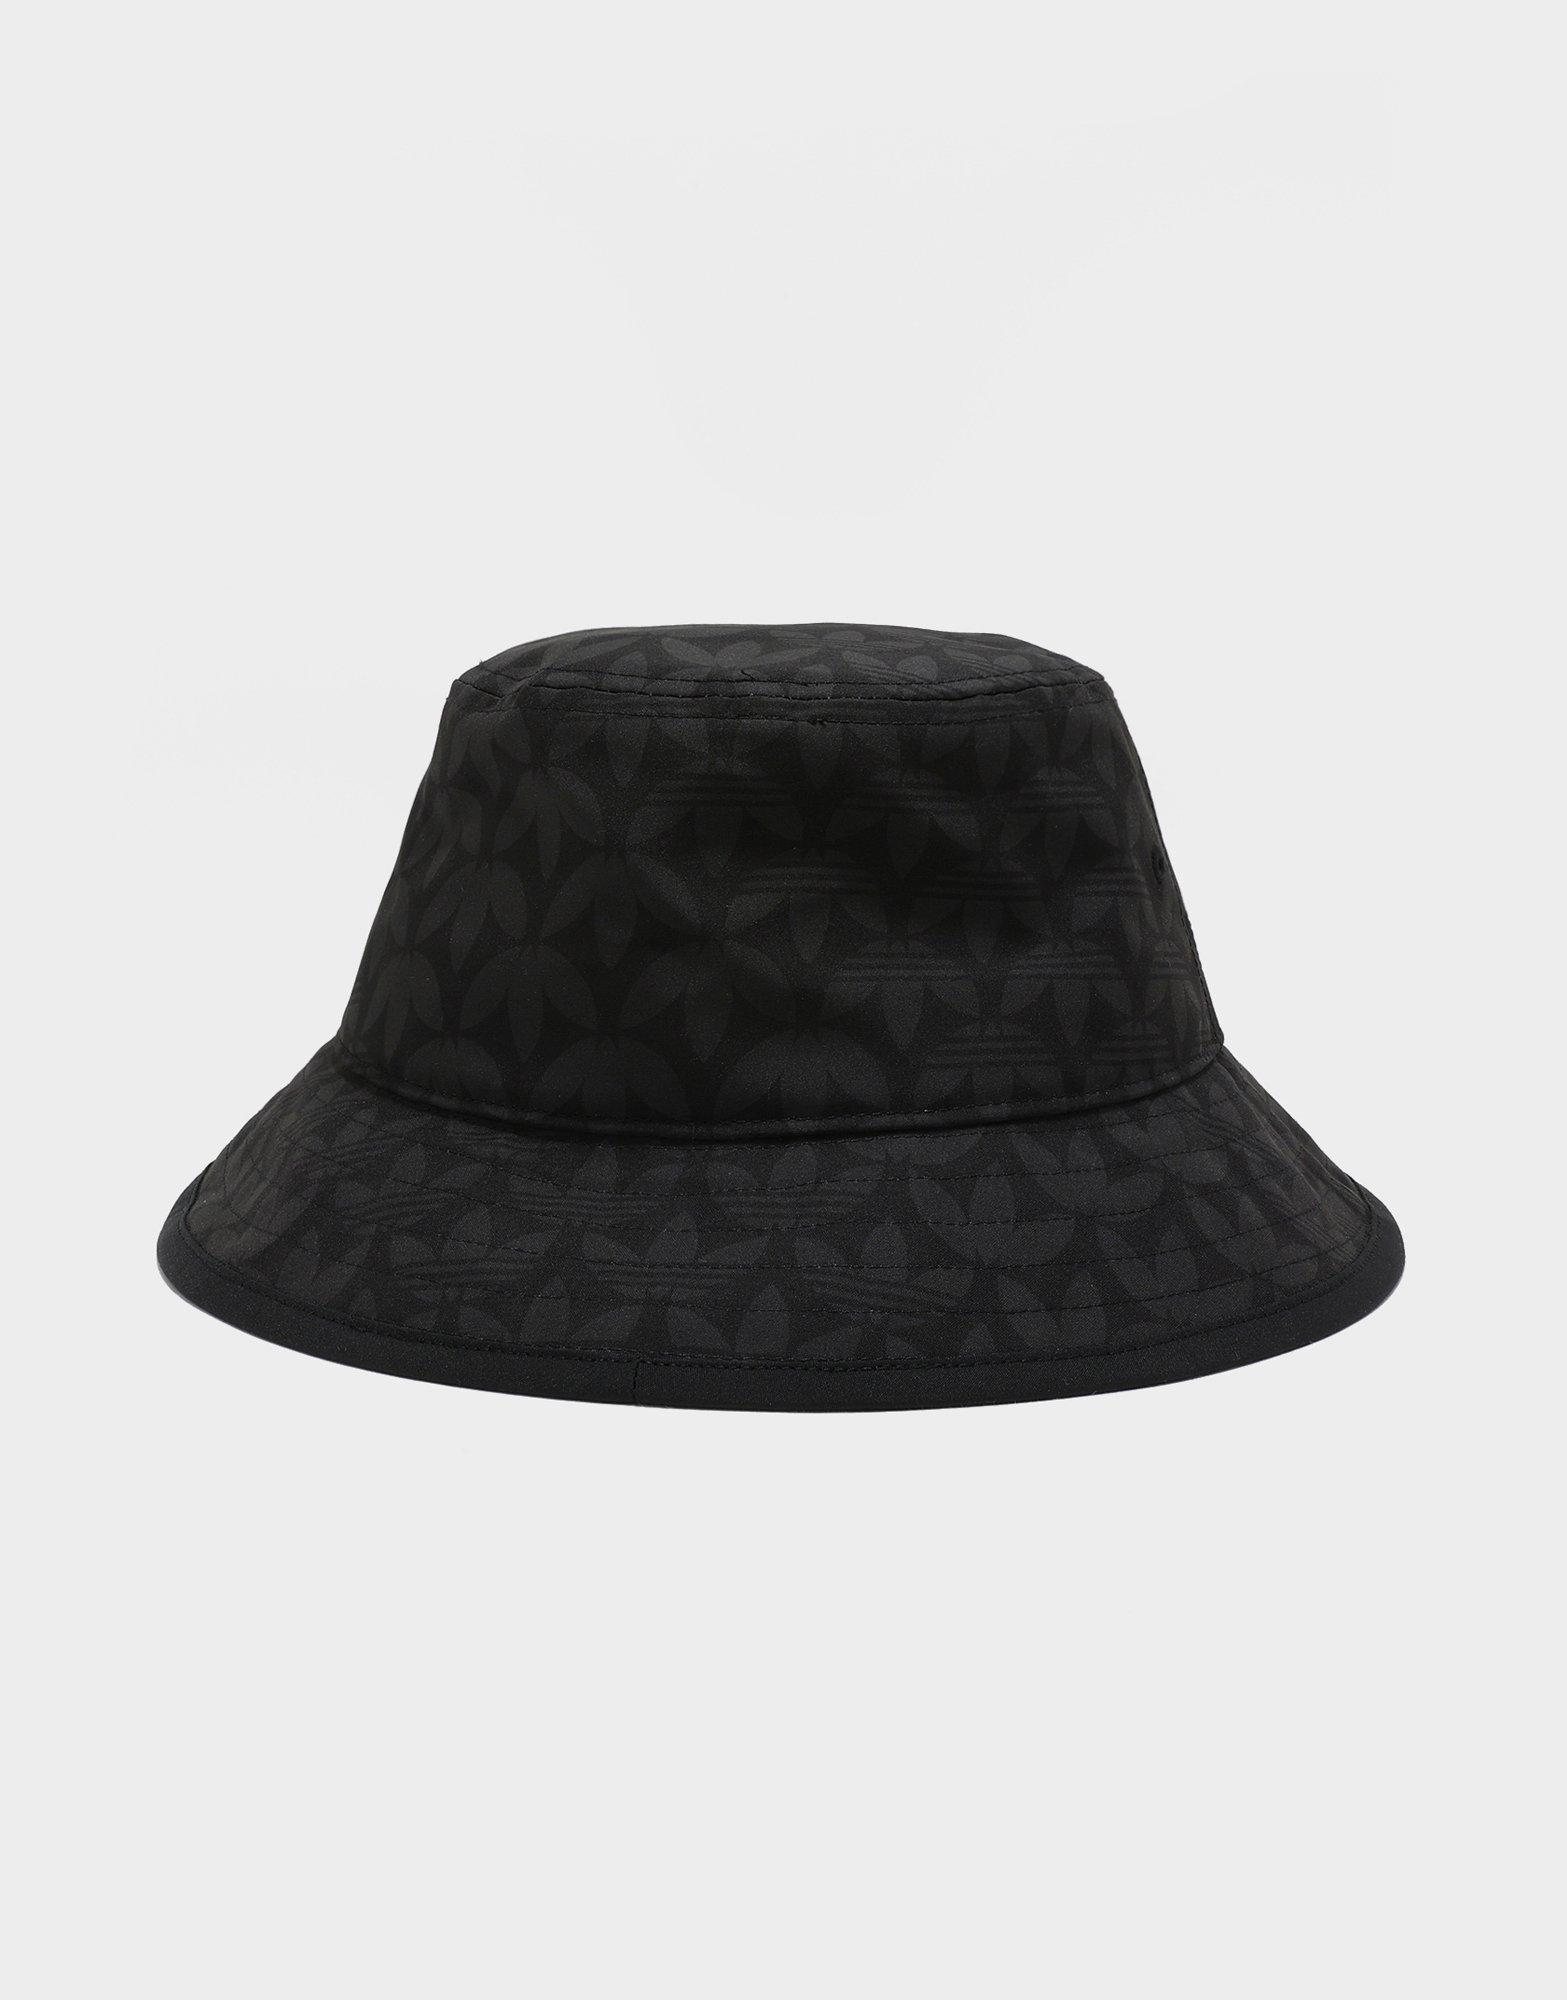 The Monogram Bucket Hat in Black, Size XS/Small